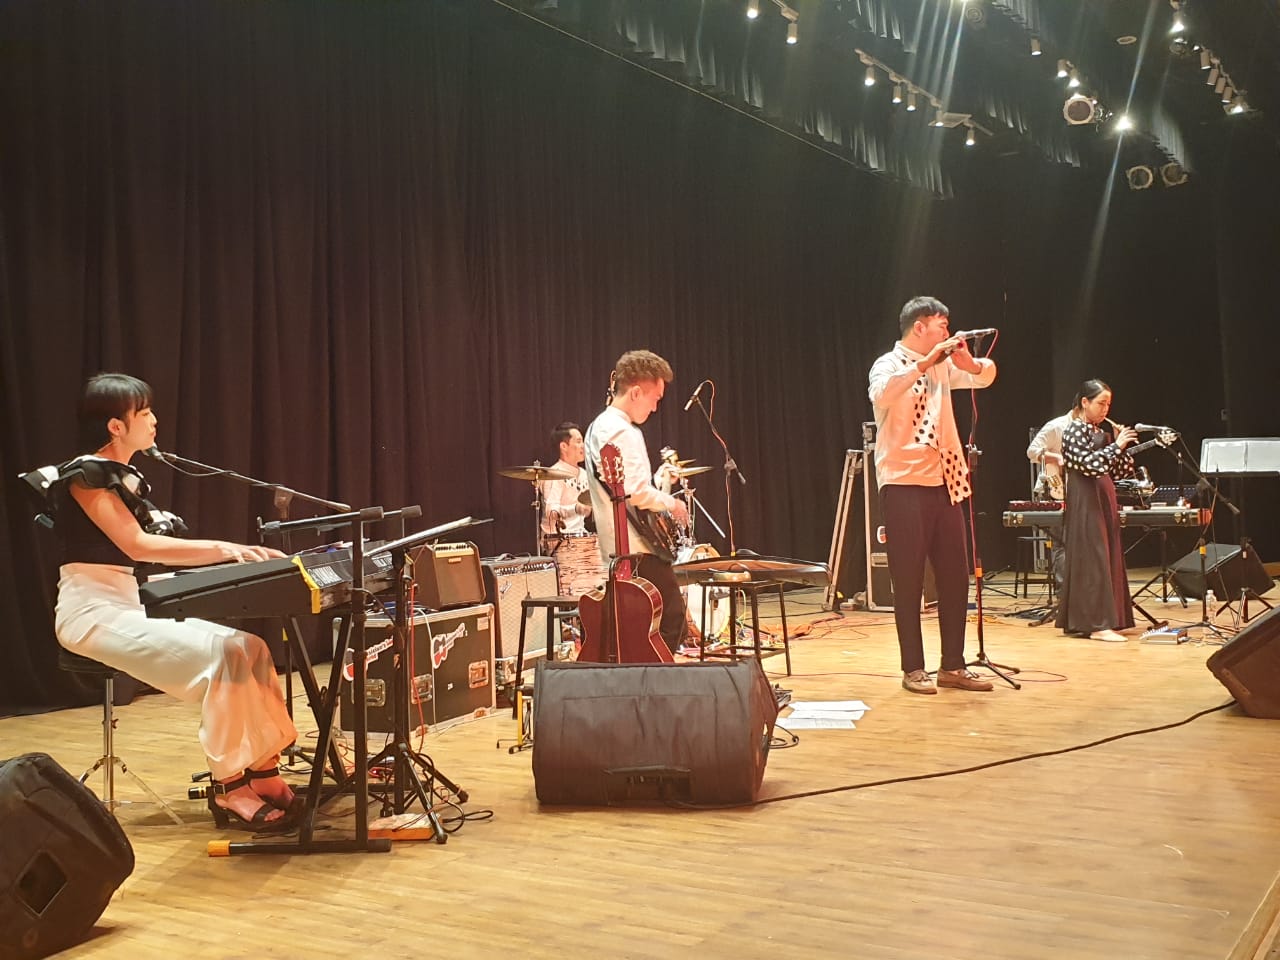 South Korean Jazz Band perform before a jam packed audience at Parul University